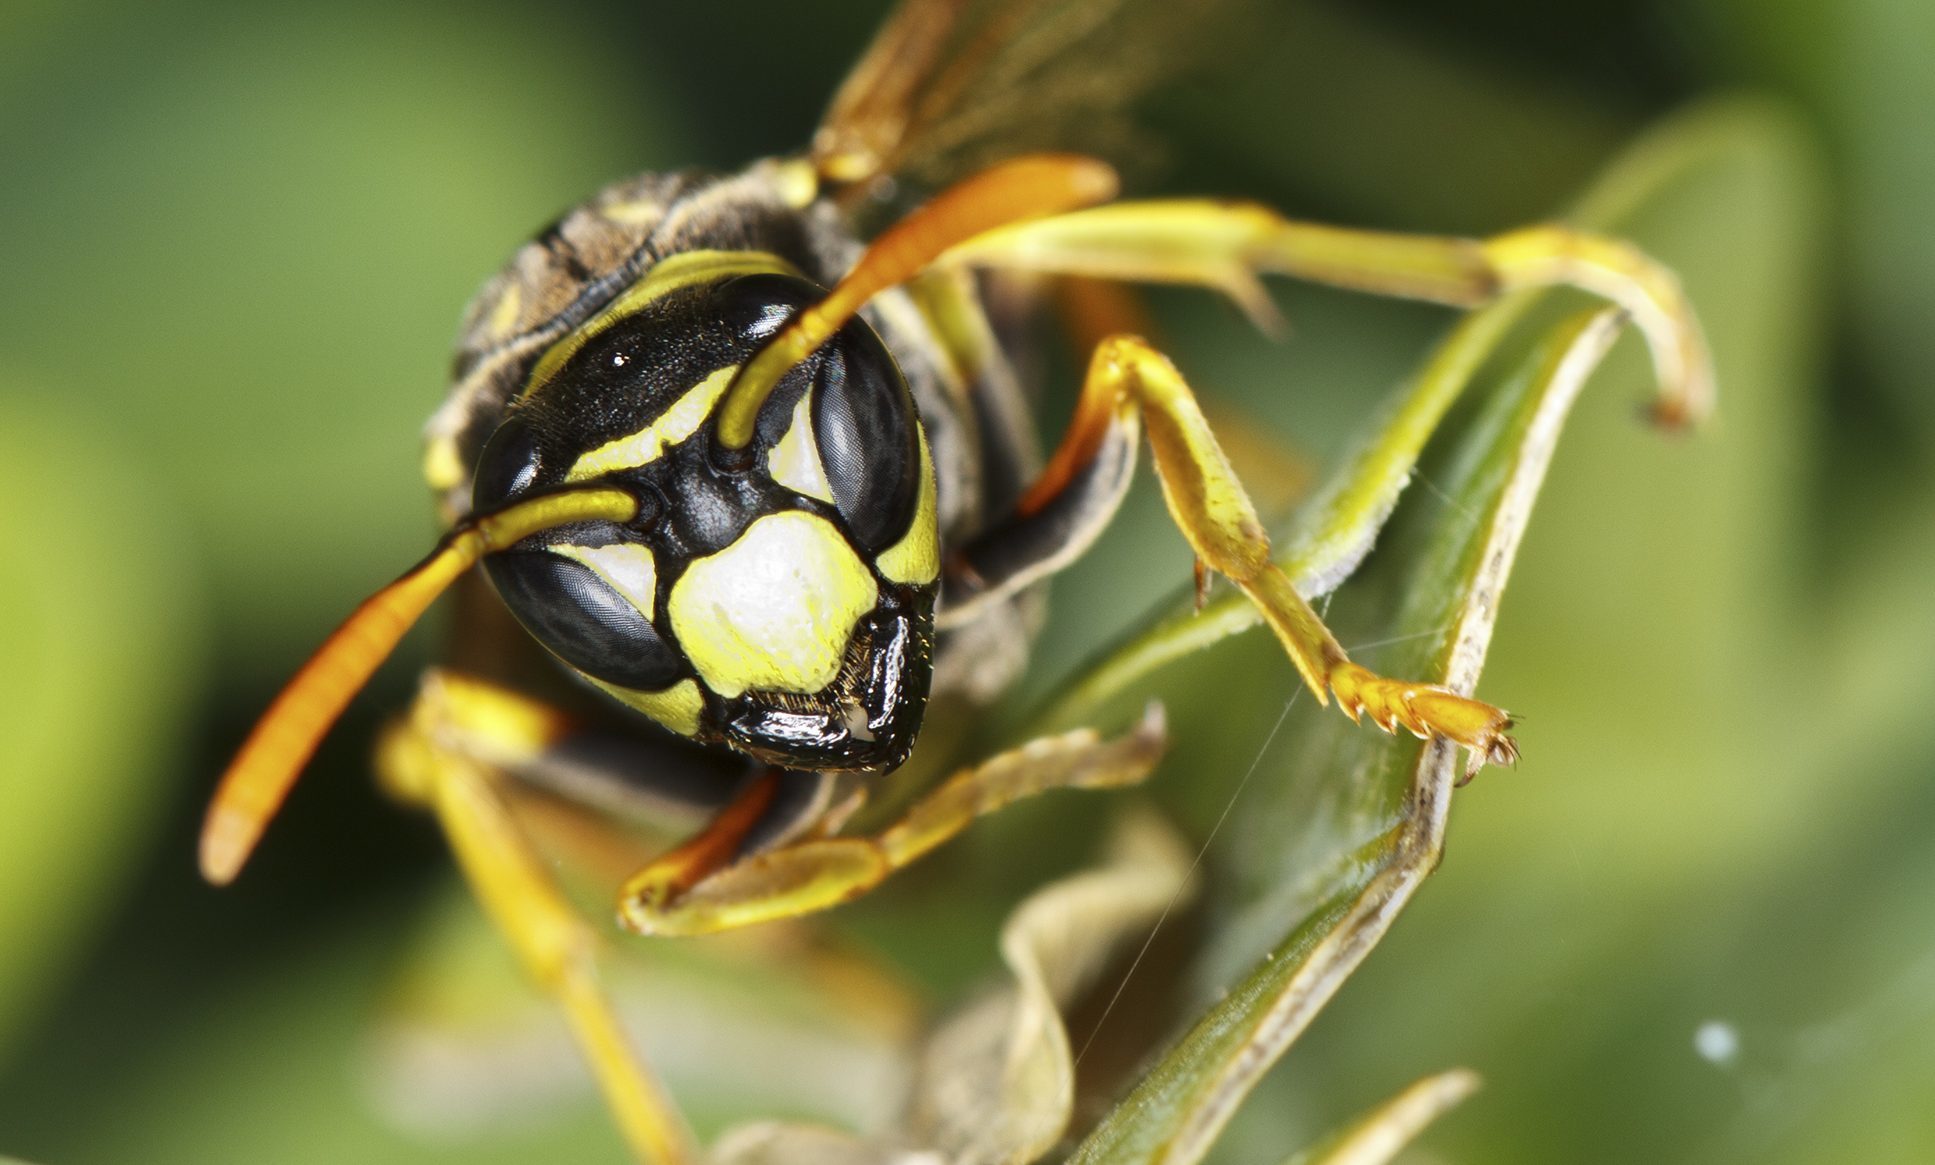 Scientists say wasps play a vital role in maintaining our ecosystem.